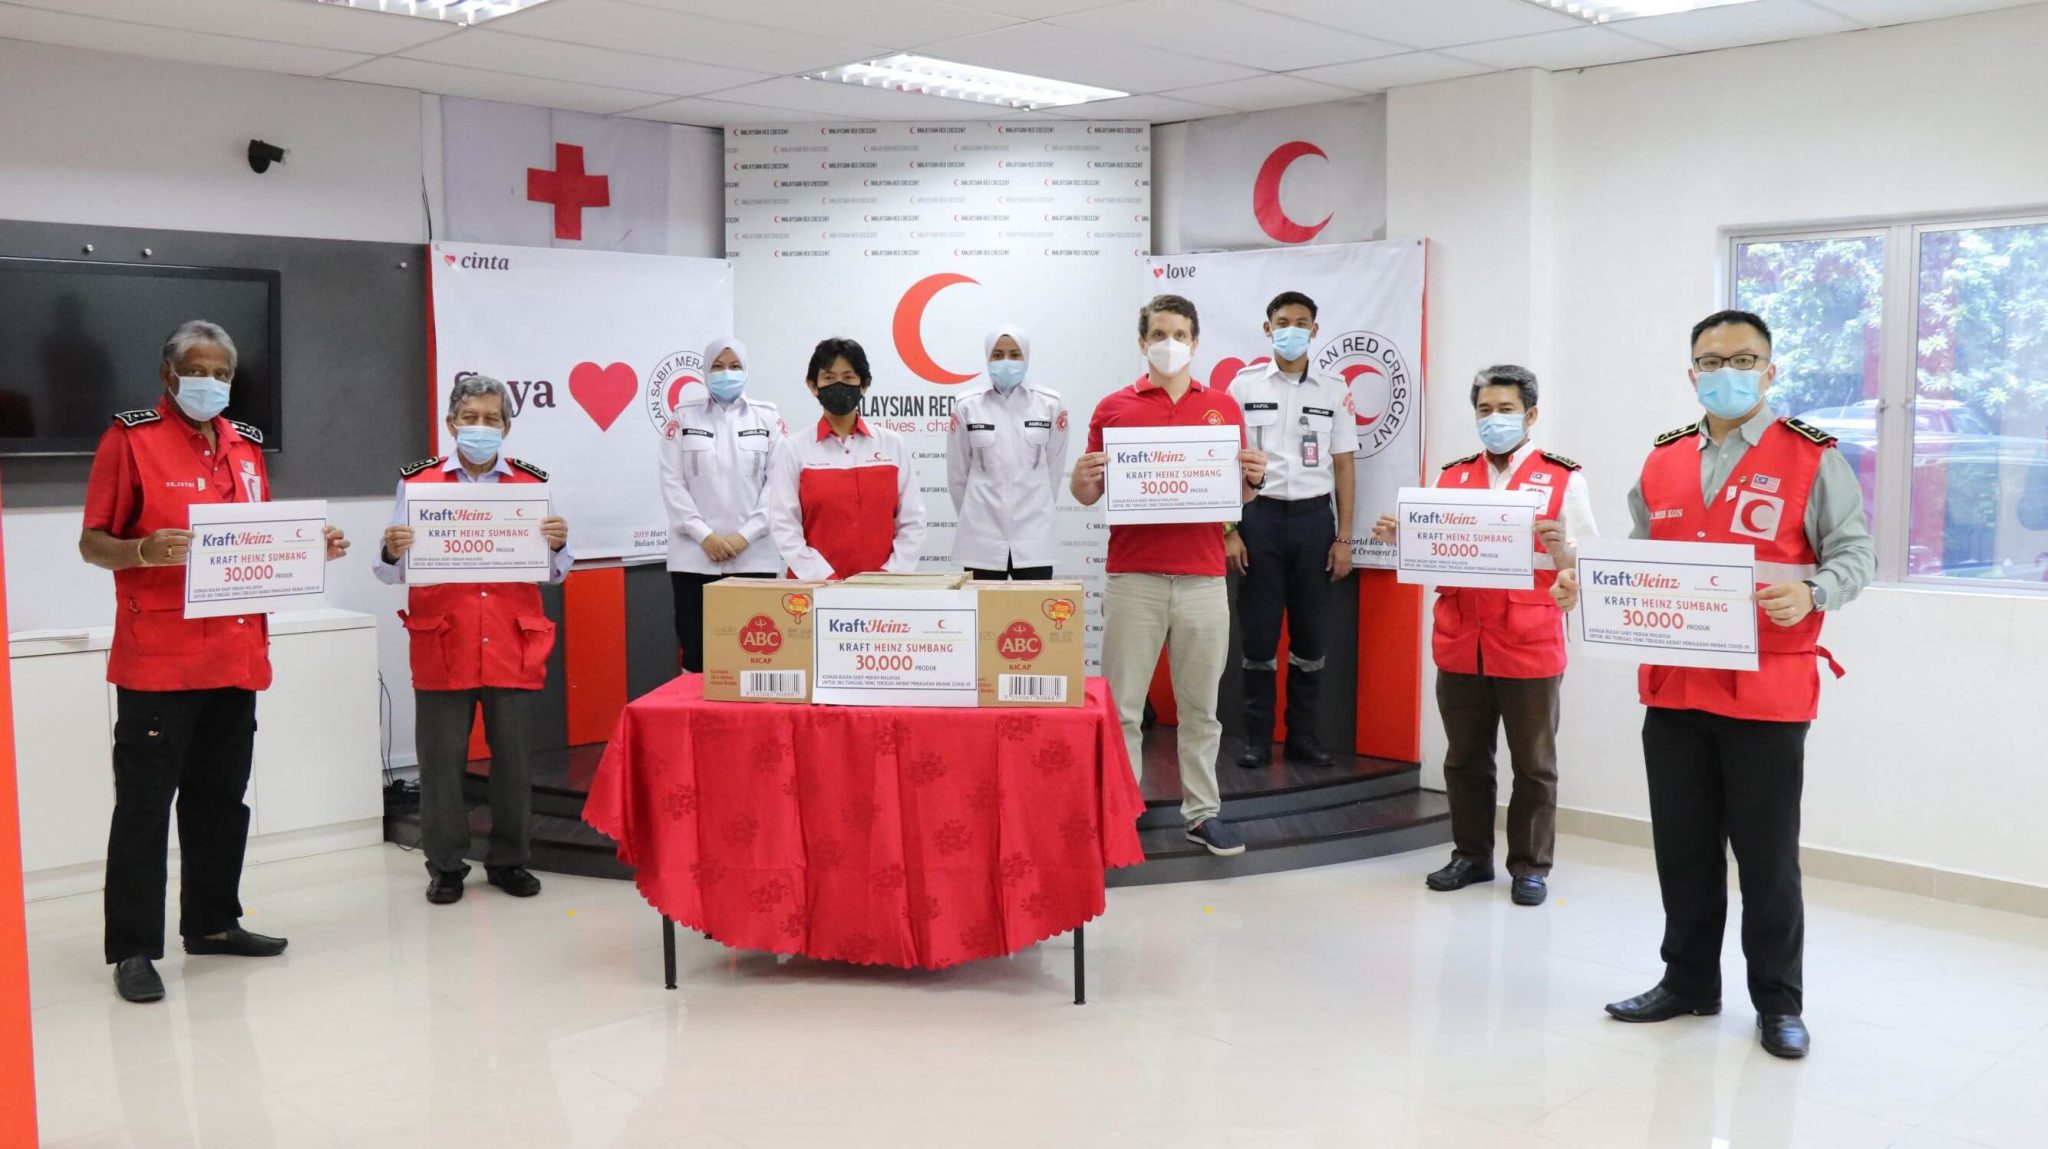 Malaysian Red Crescent on #responsMALAYSIA project with Kraft Heinz